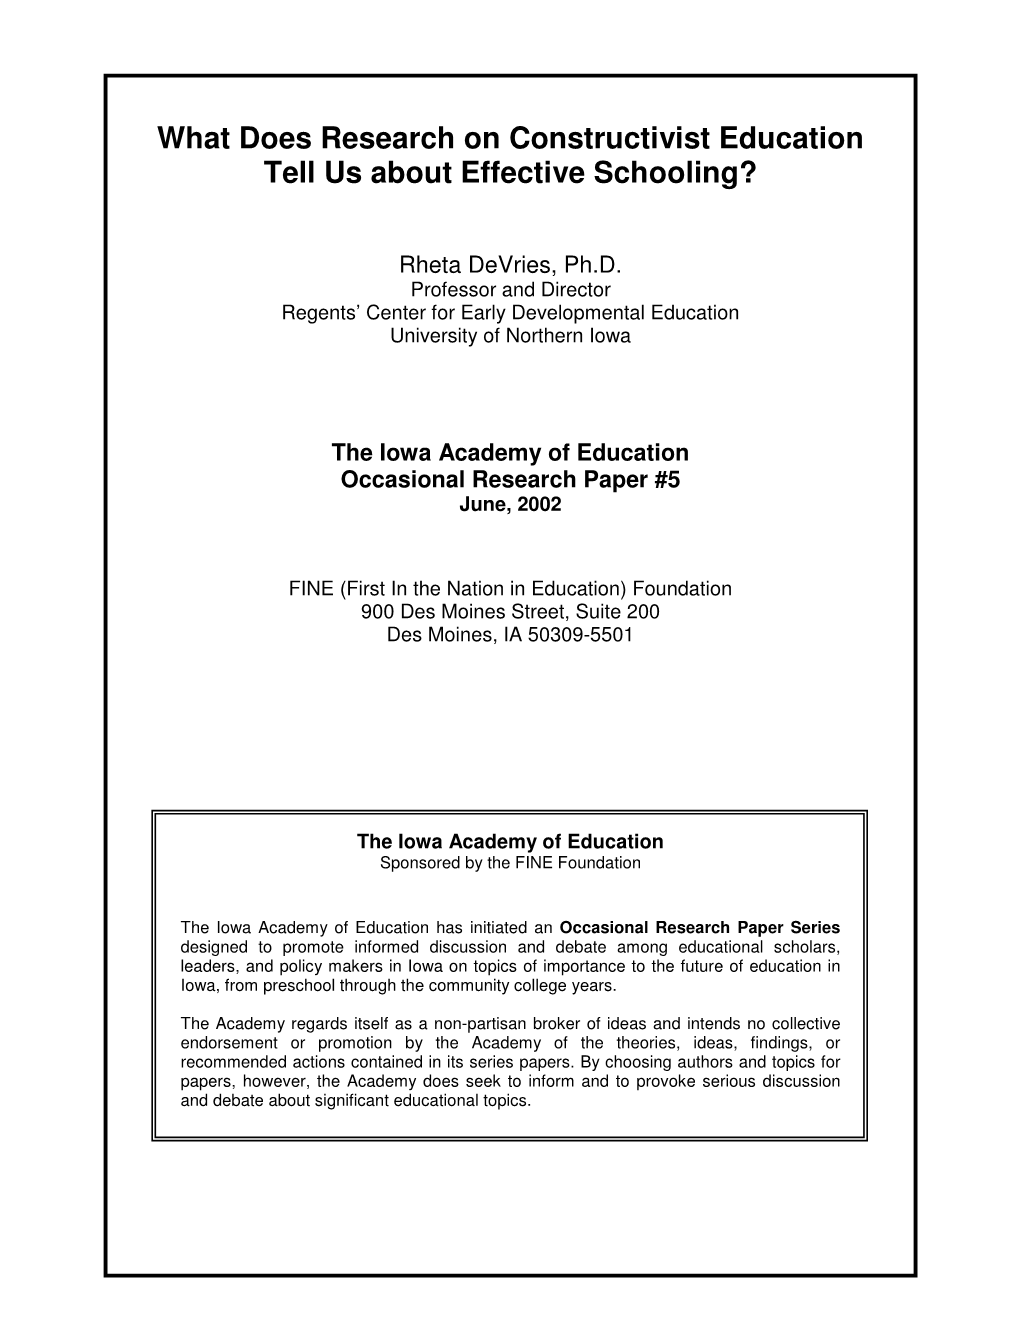 What Does Research on Constructivist Education Tell Us About Effective Schooling?